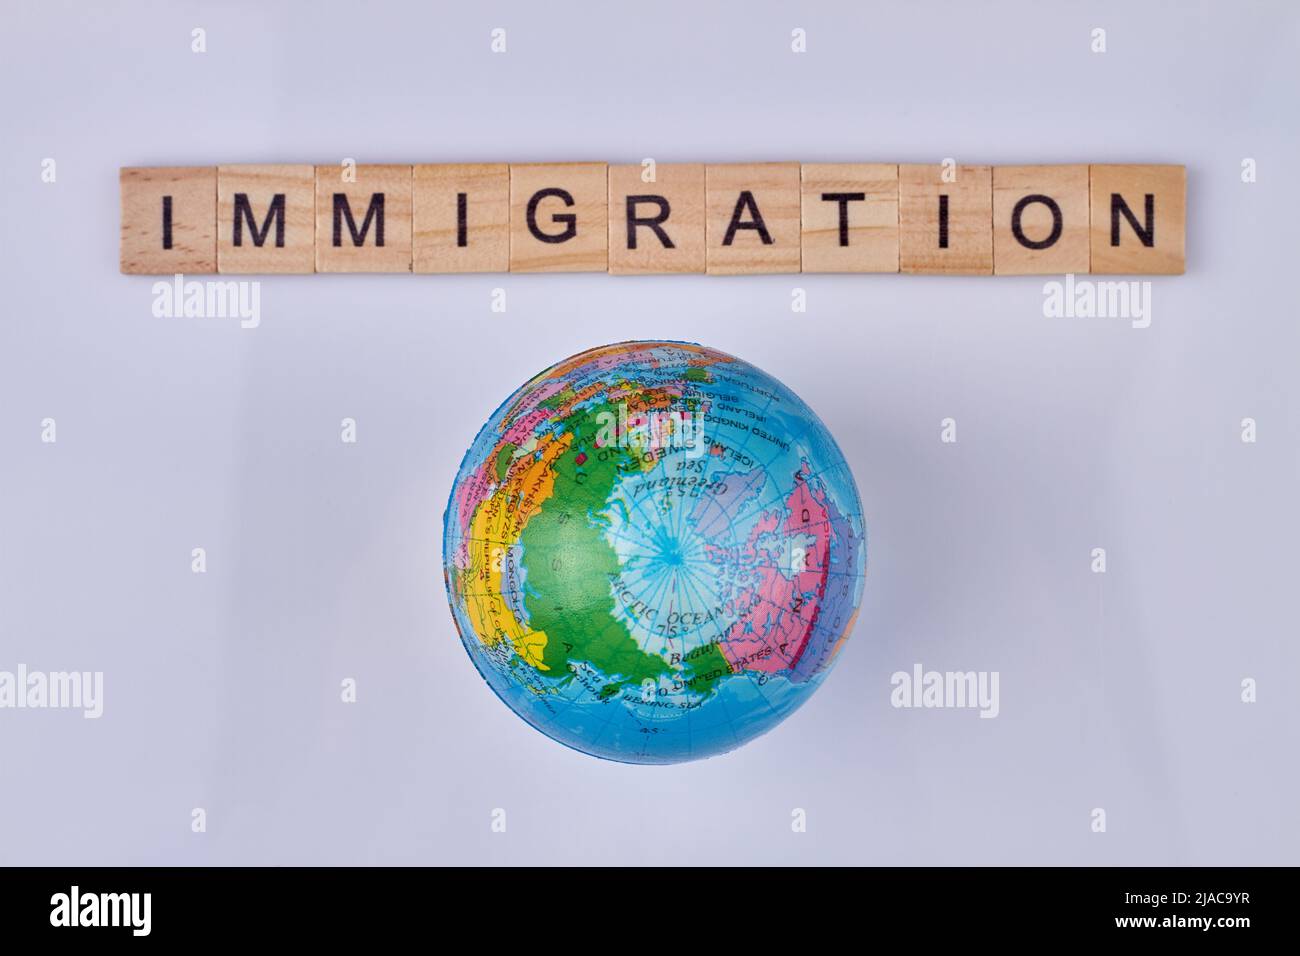 Word immigration written on wooden cubes and world globe. Top view. Stock Photo